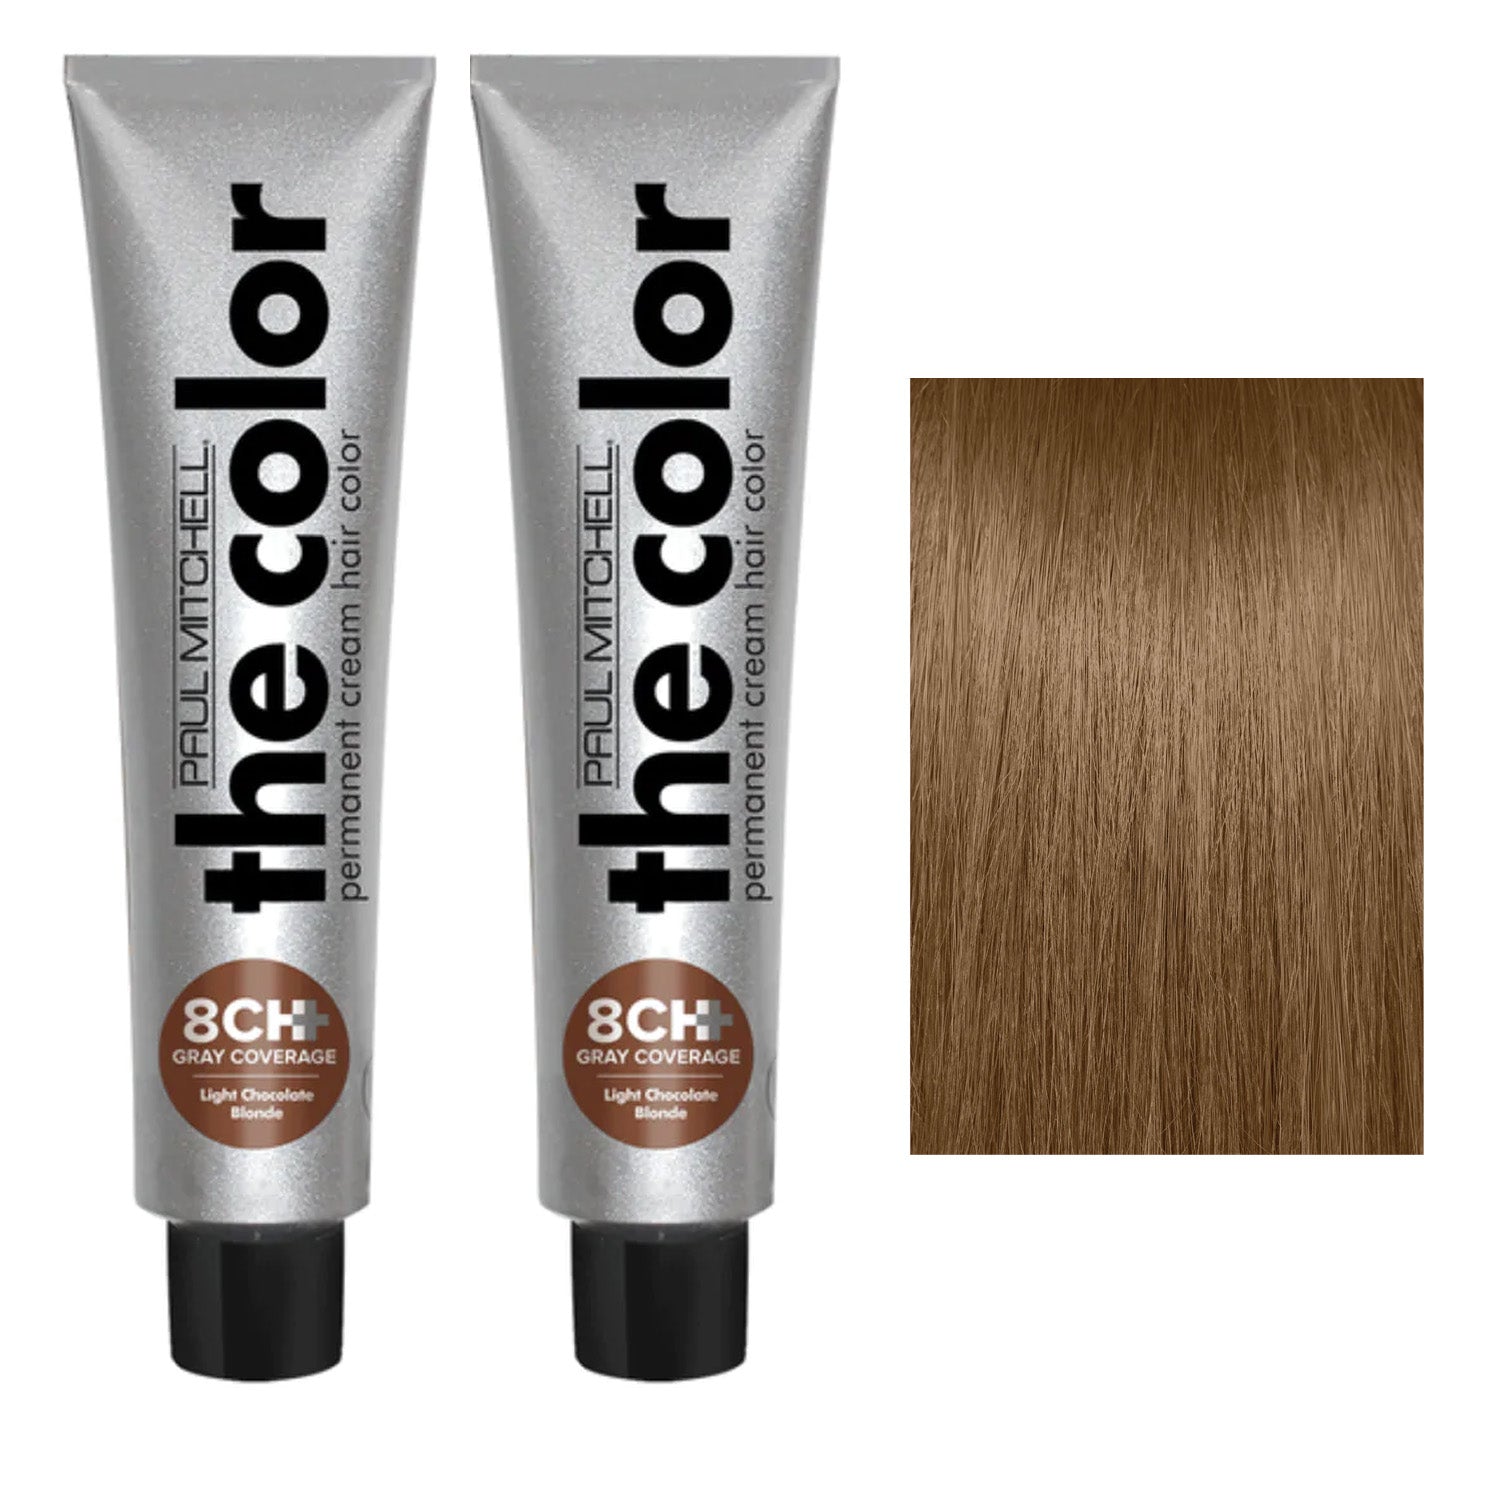 Paul Mitchell the Color Gray Coverage 8CH+ 3oz